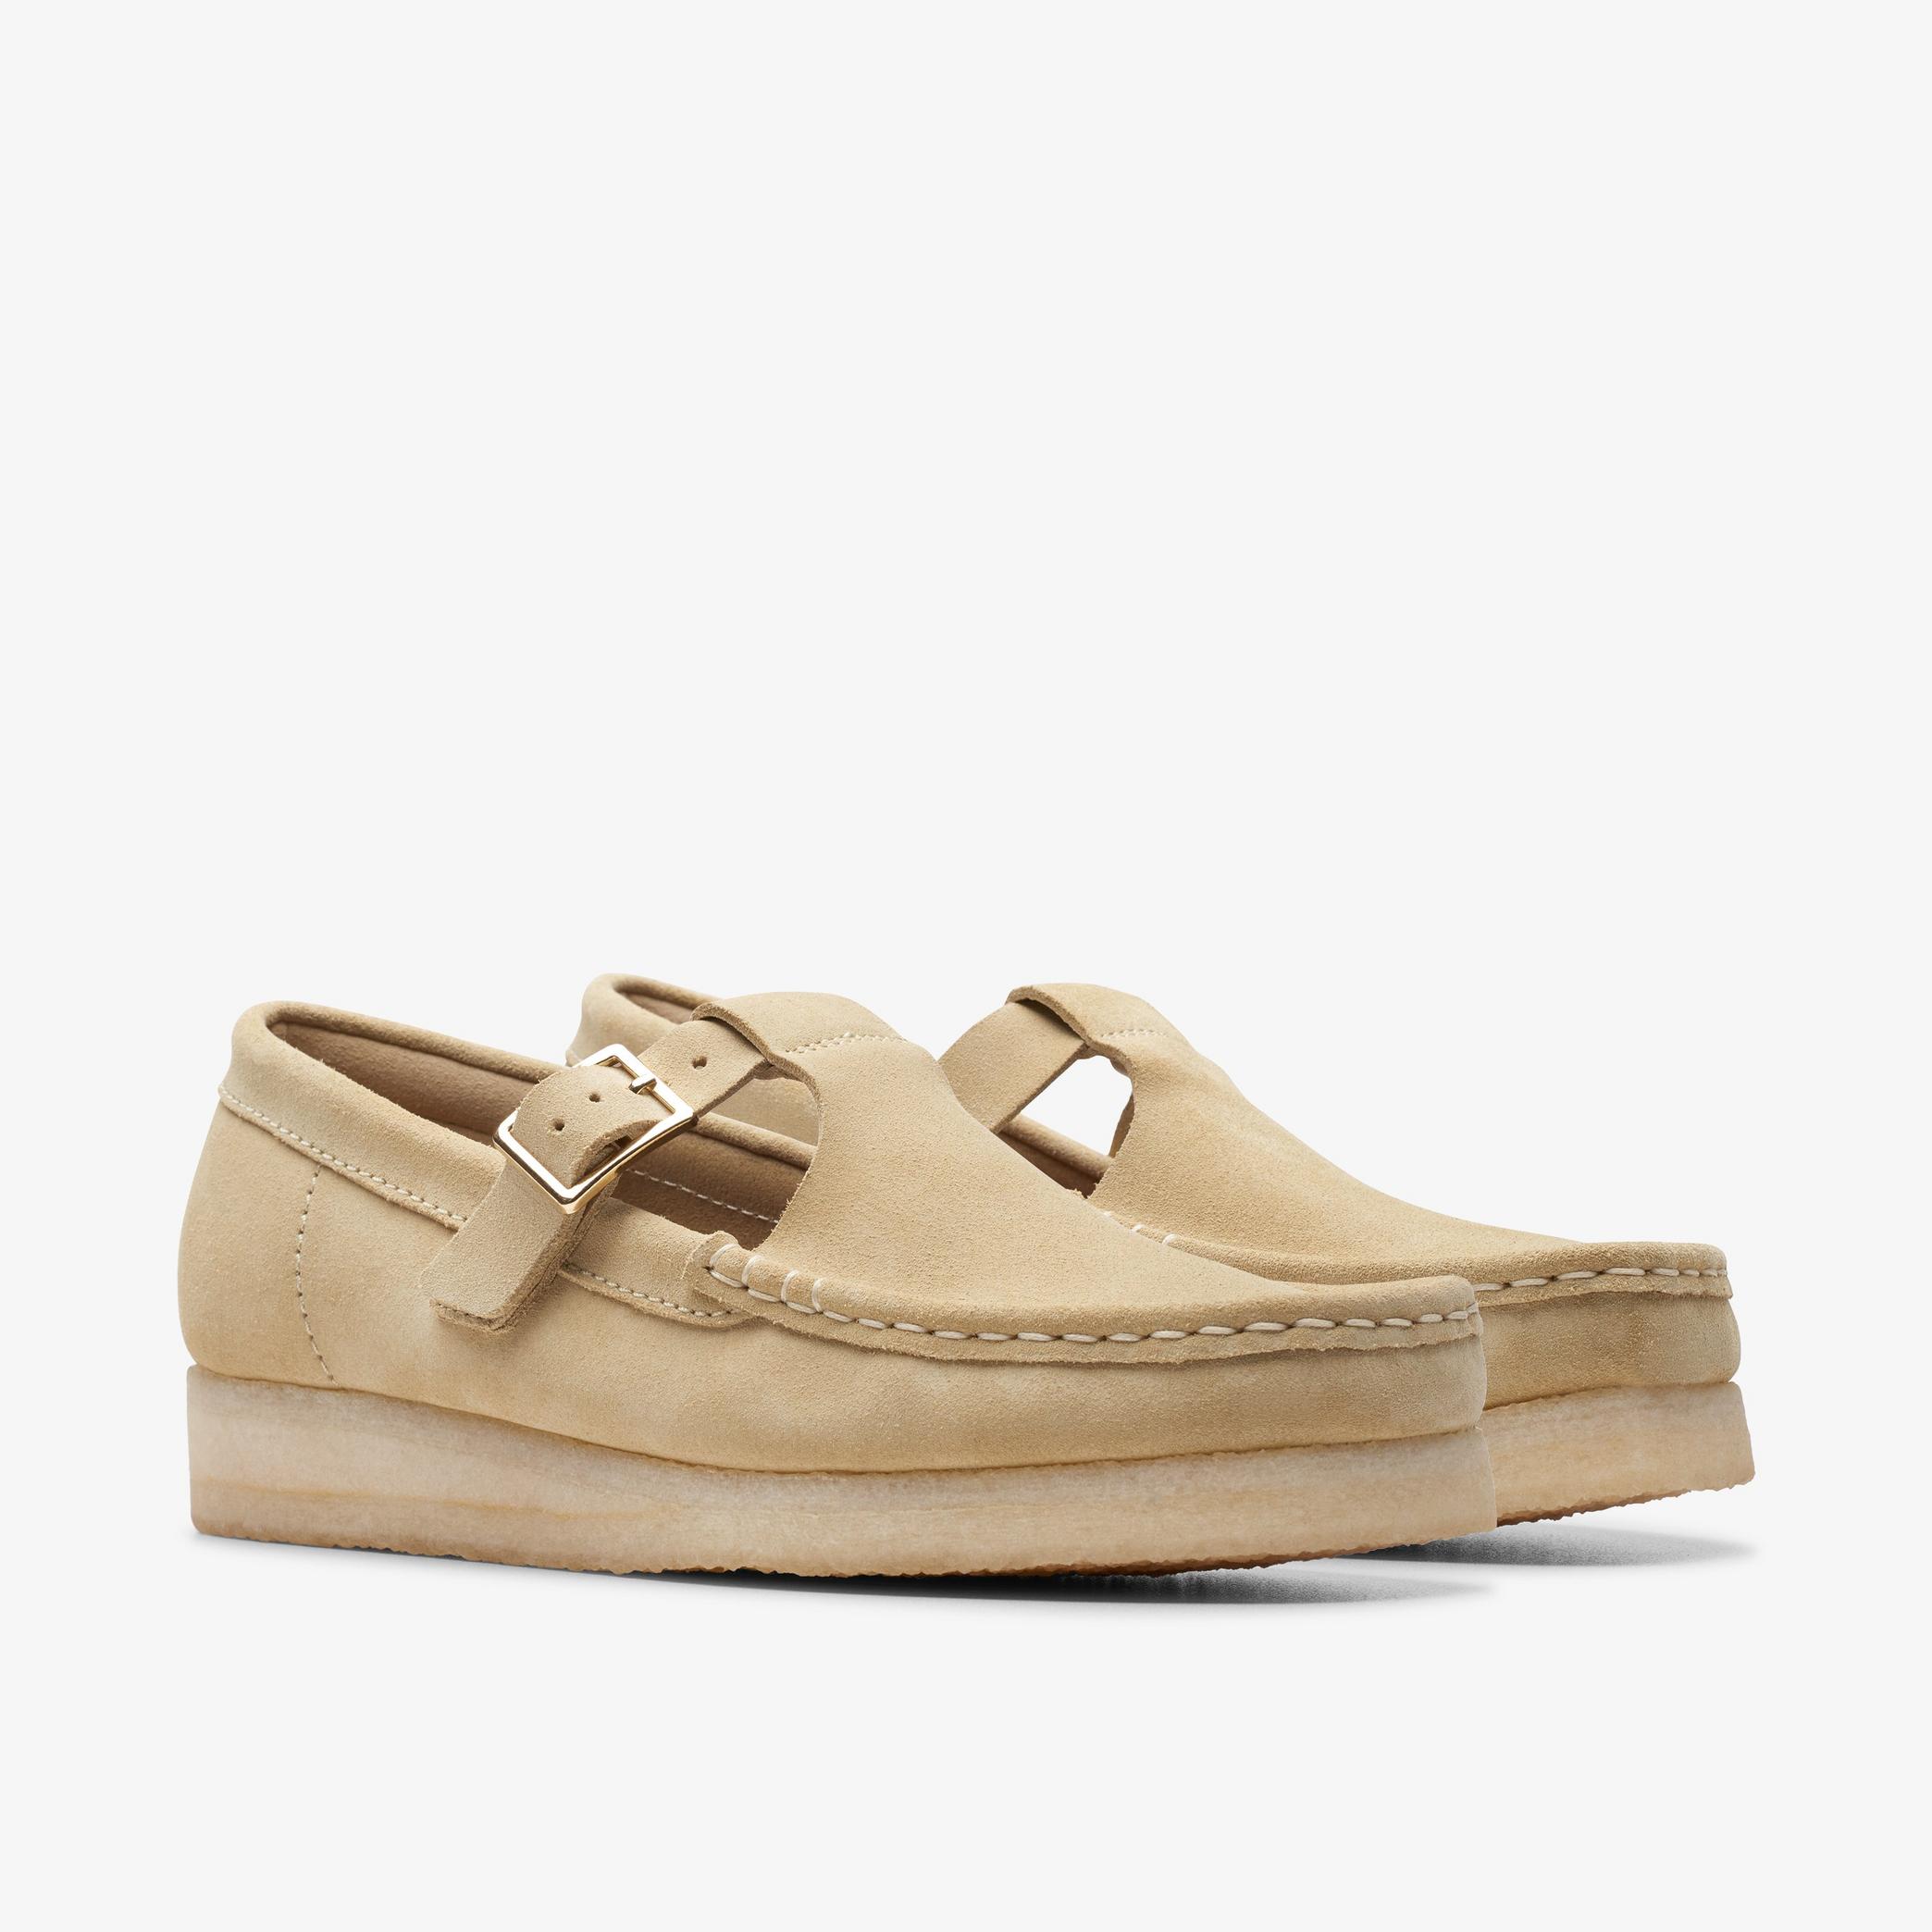 Wallabee T-Bar Maple Suede Loafers, view 4 of 6